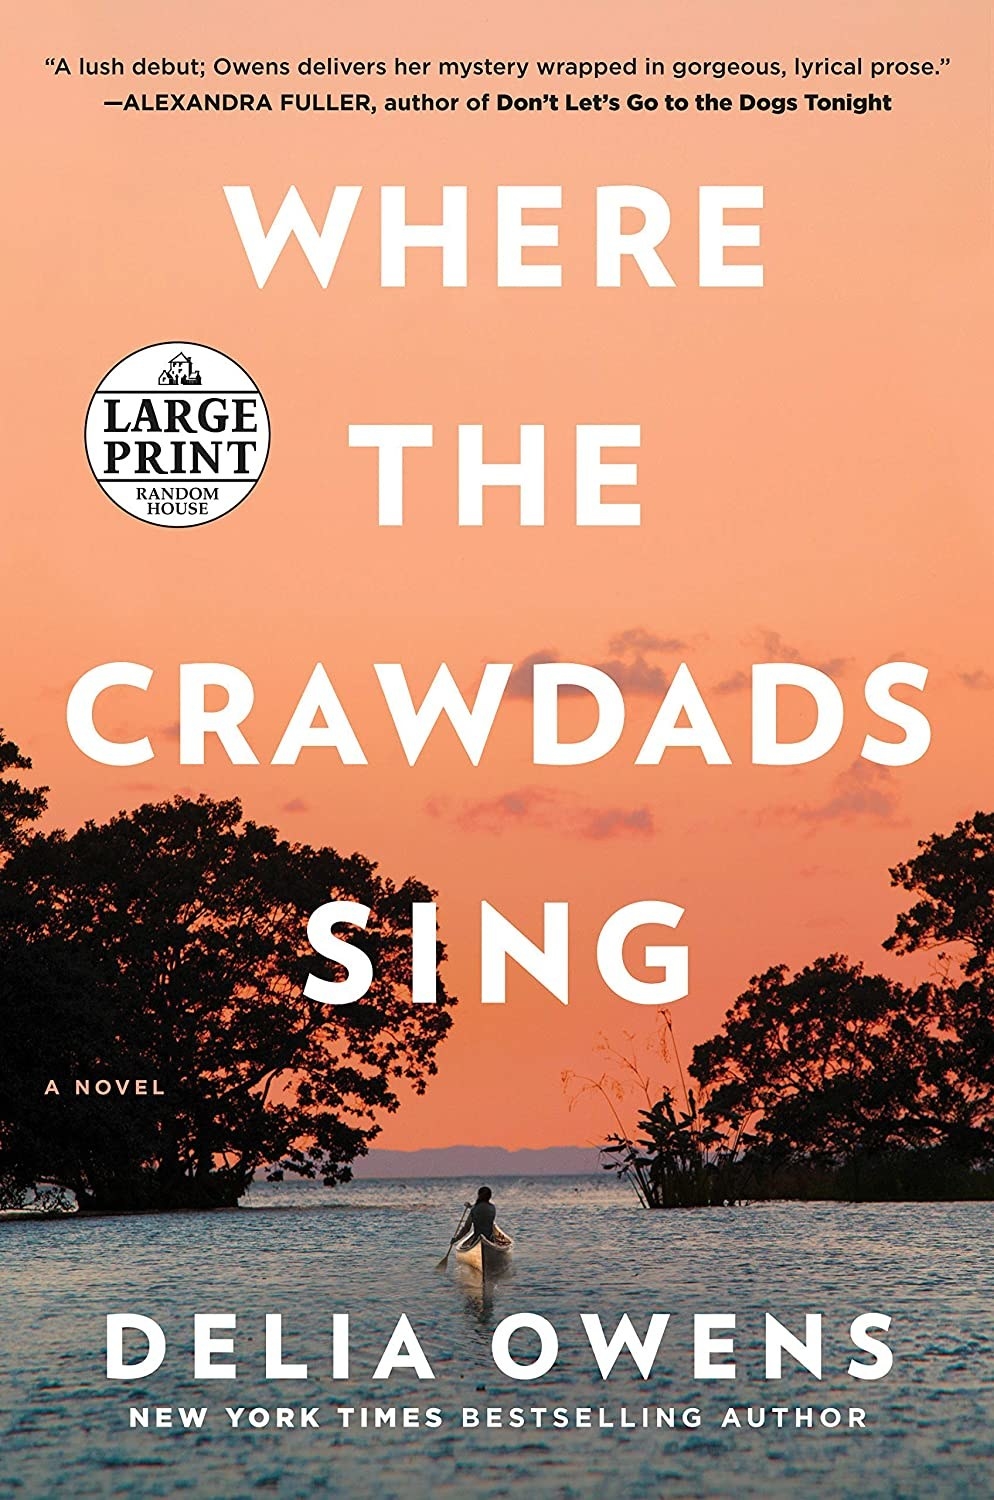 The cover of &quot;Where the Crawdads Sing&quot; by Delia Owens.